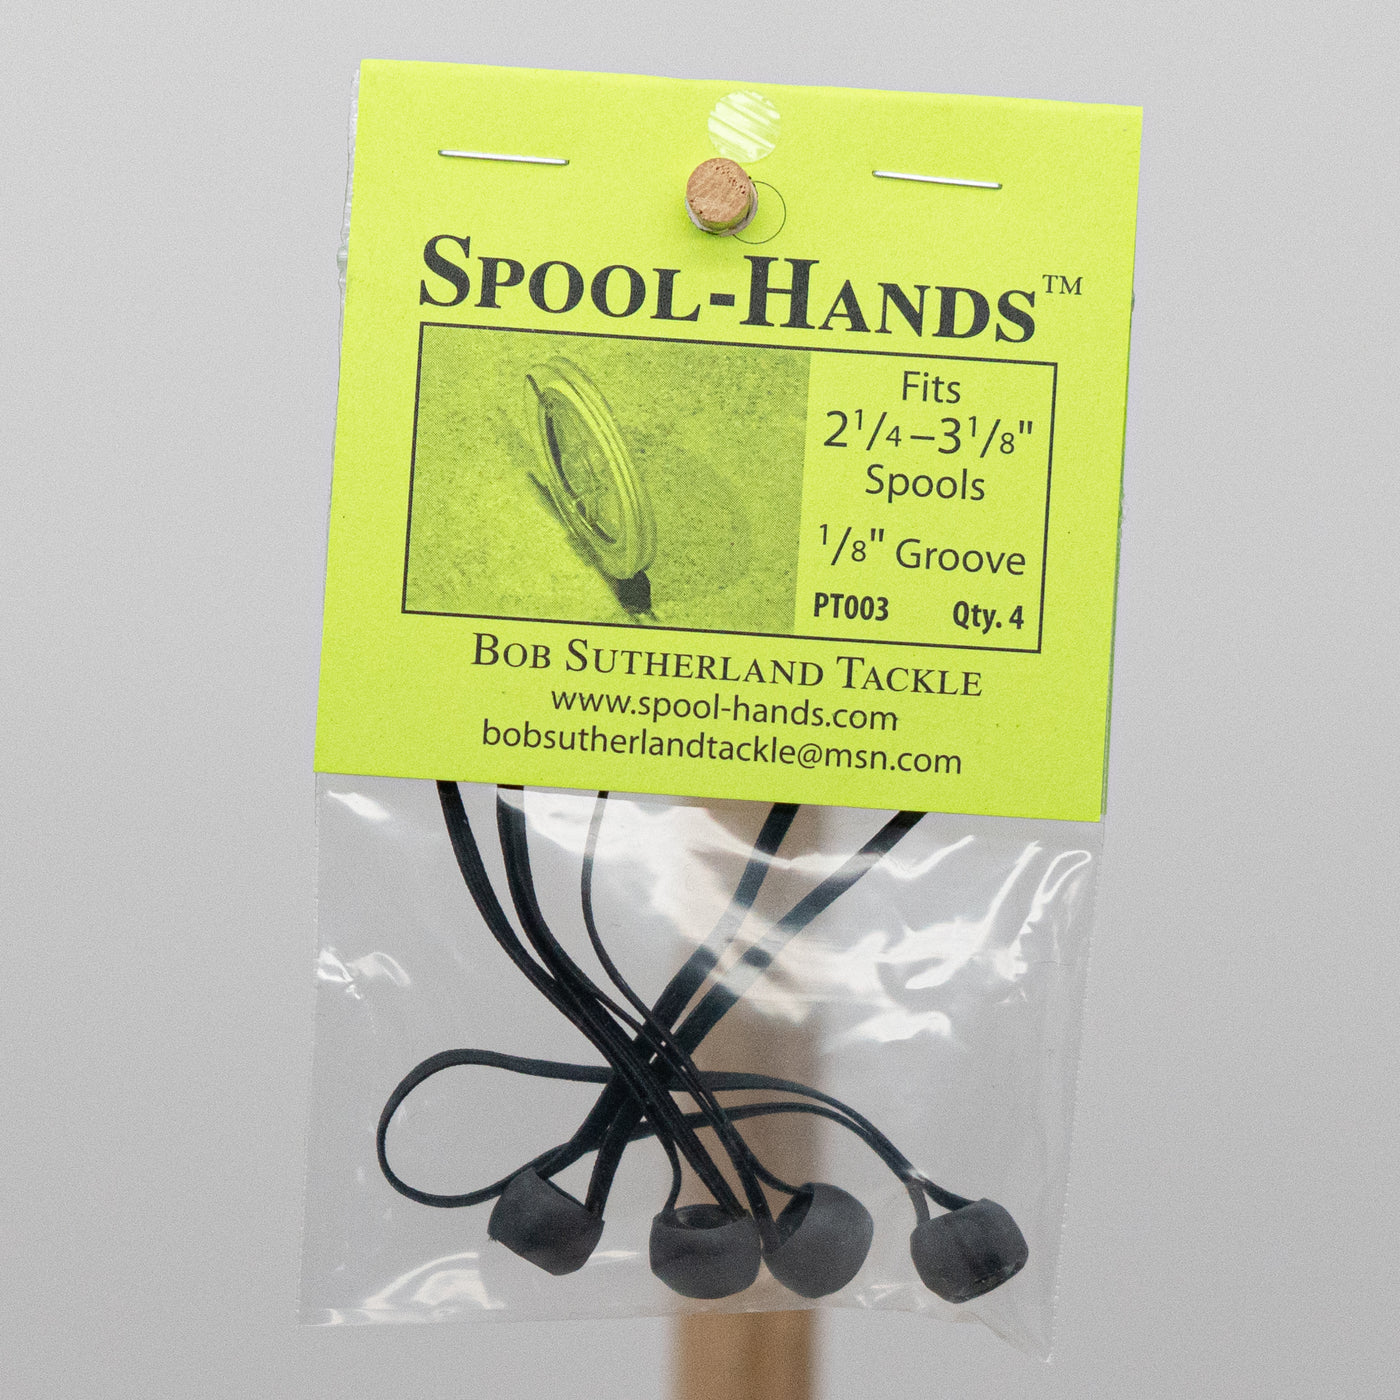 1/8" SPOOL HANDS FOR 2 1/4 - 3 1/8 SPOOLS 4 PACK